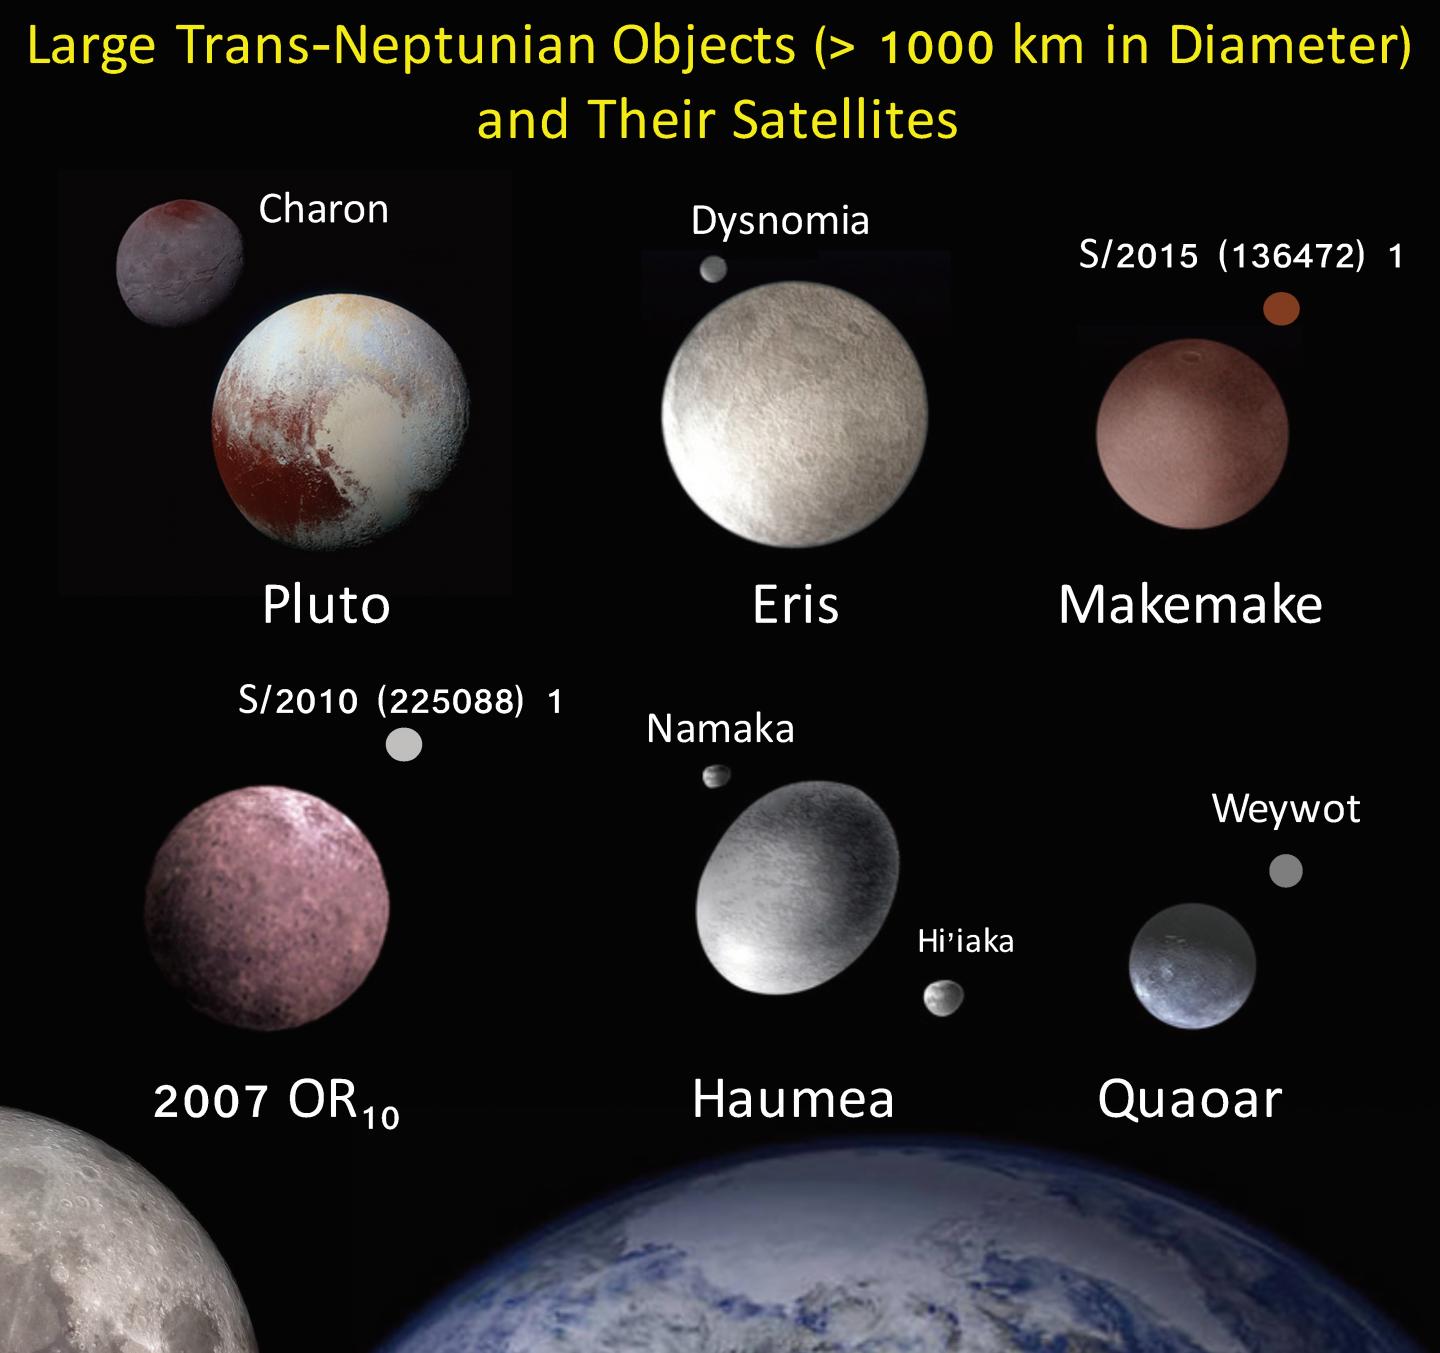 Largest TNOs with 1000 km in Diameter and their Satellite(s)